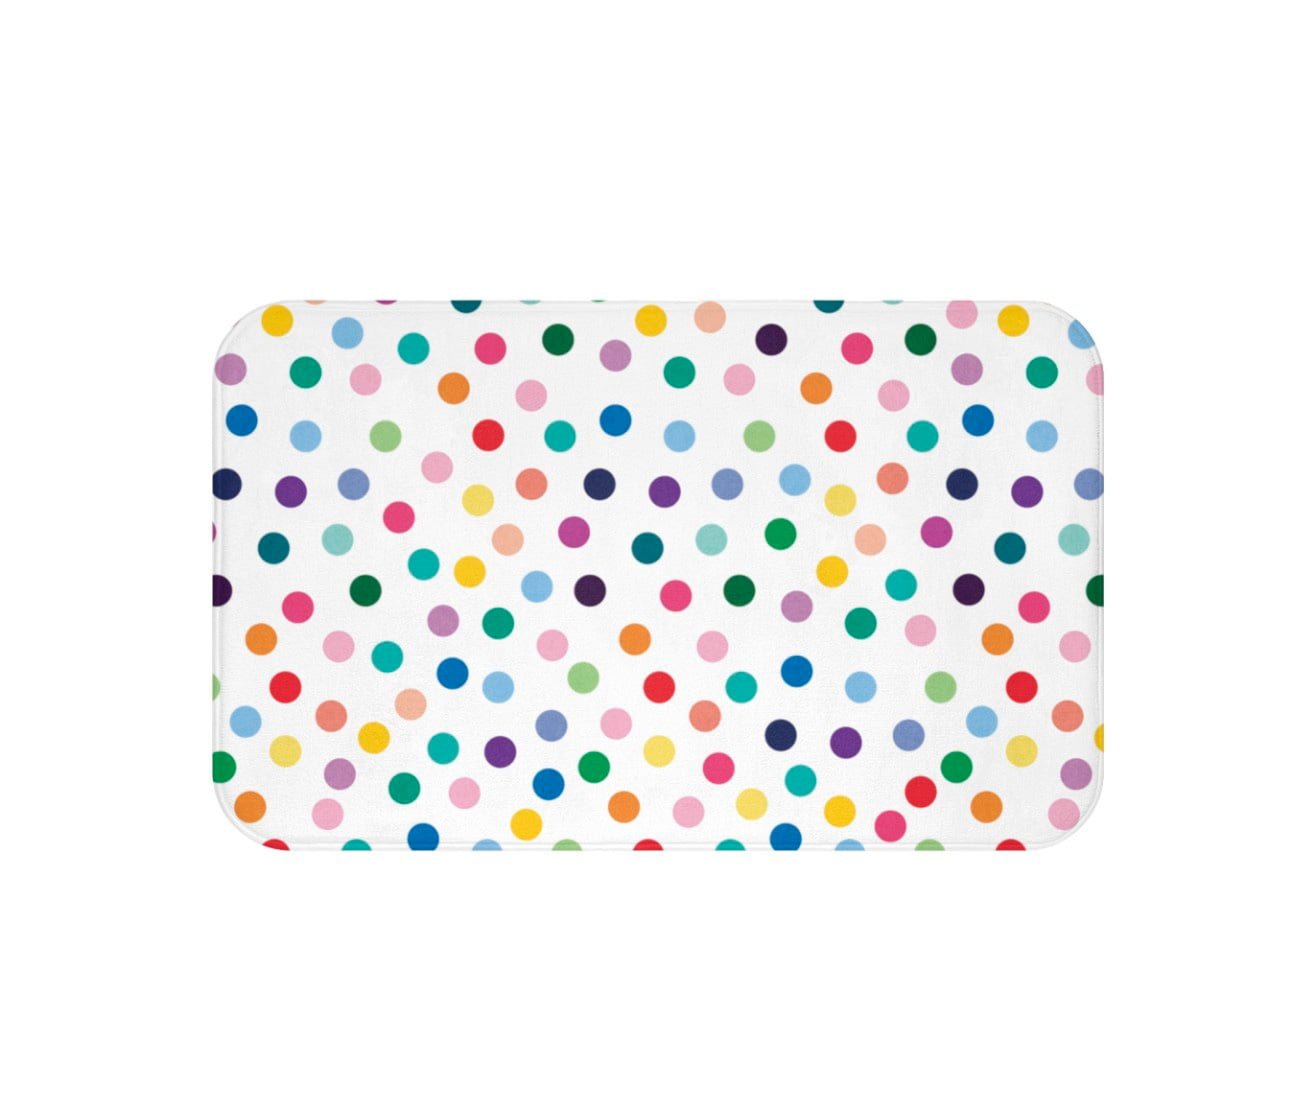 https://www.ozscapedesigns.com/wp-content/uploads/2022/12/kids-bath-mat-with-colorful-polka-dots-5.jpg